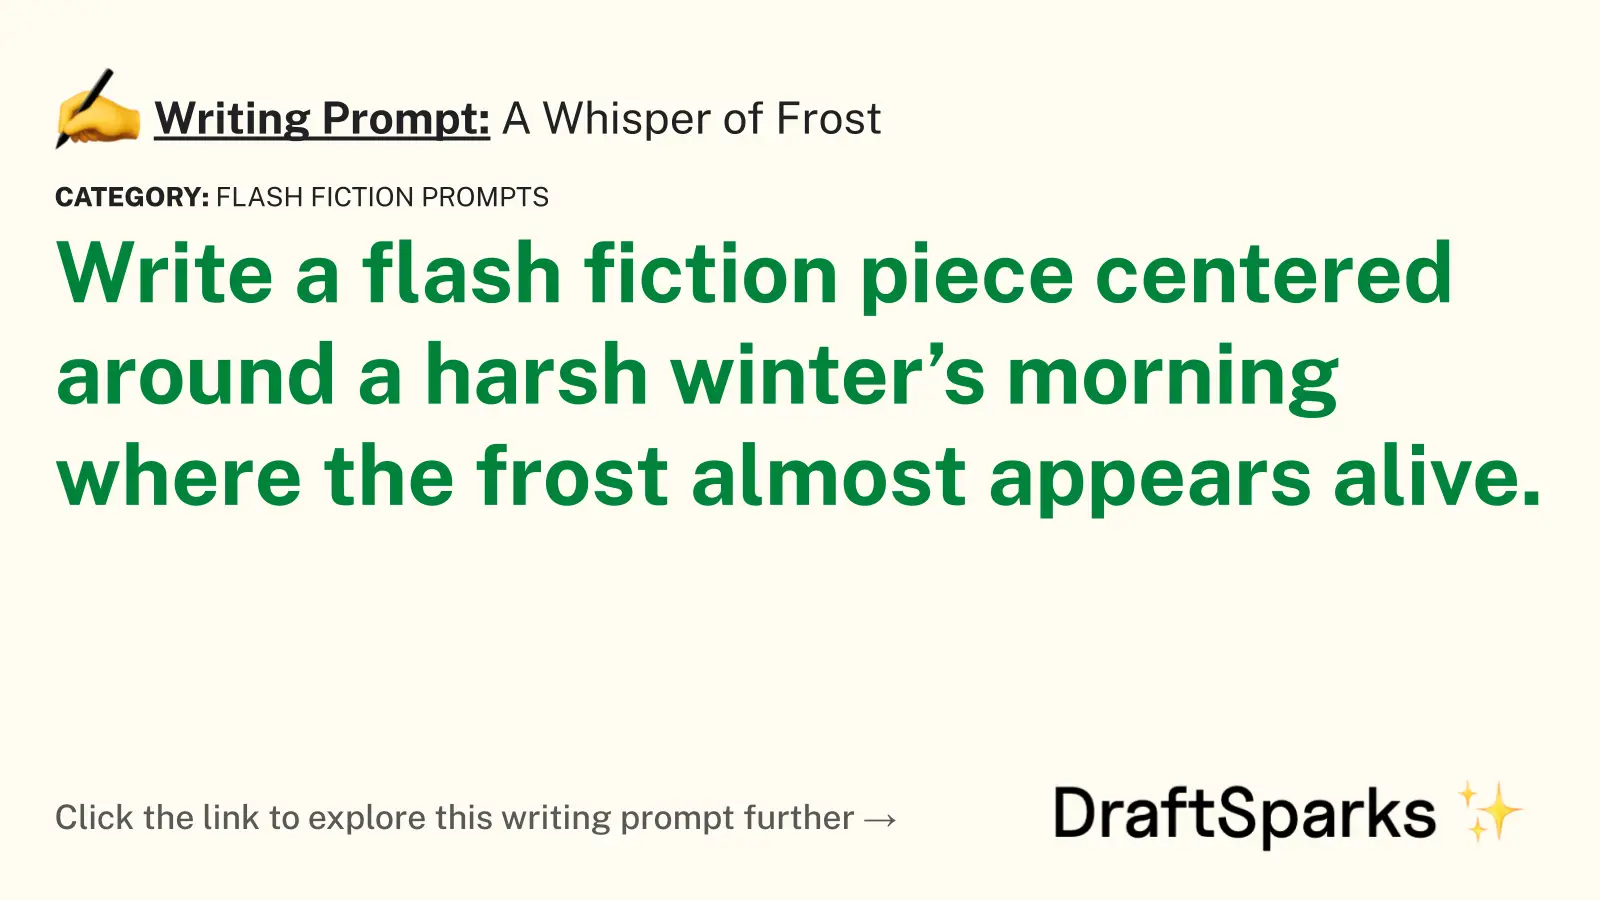 A Whisper of Frost